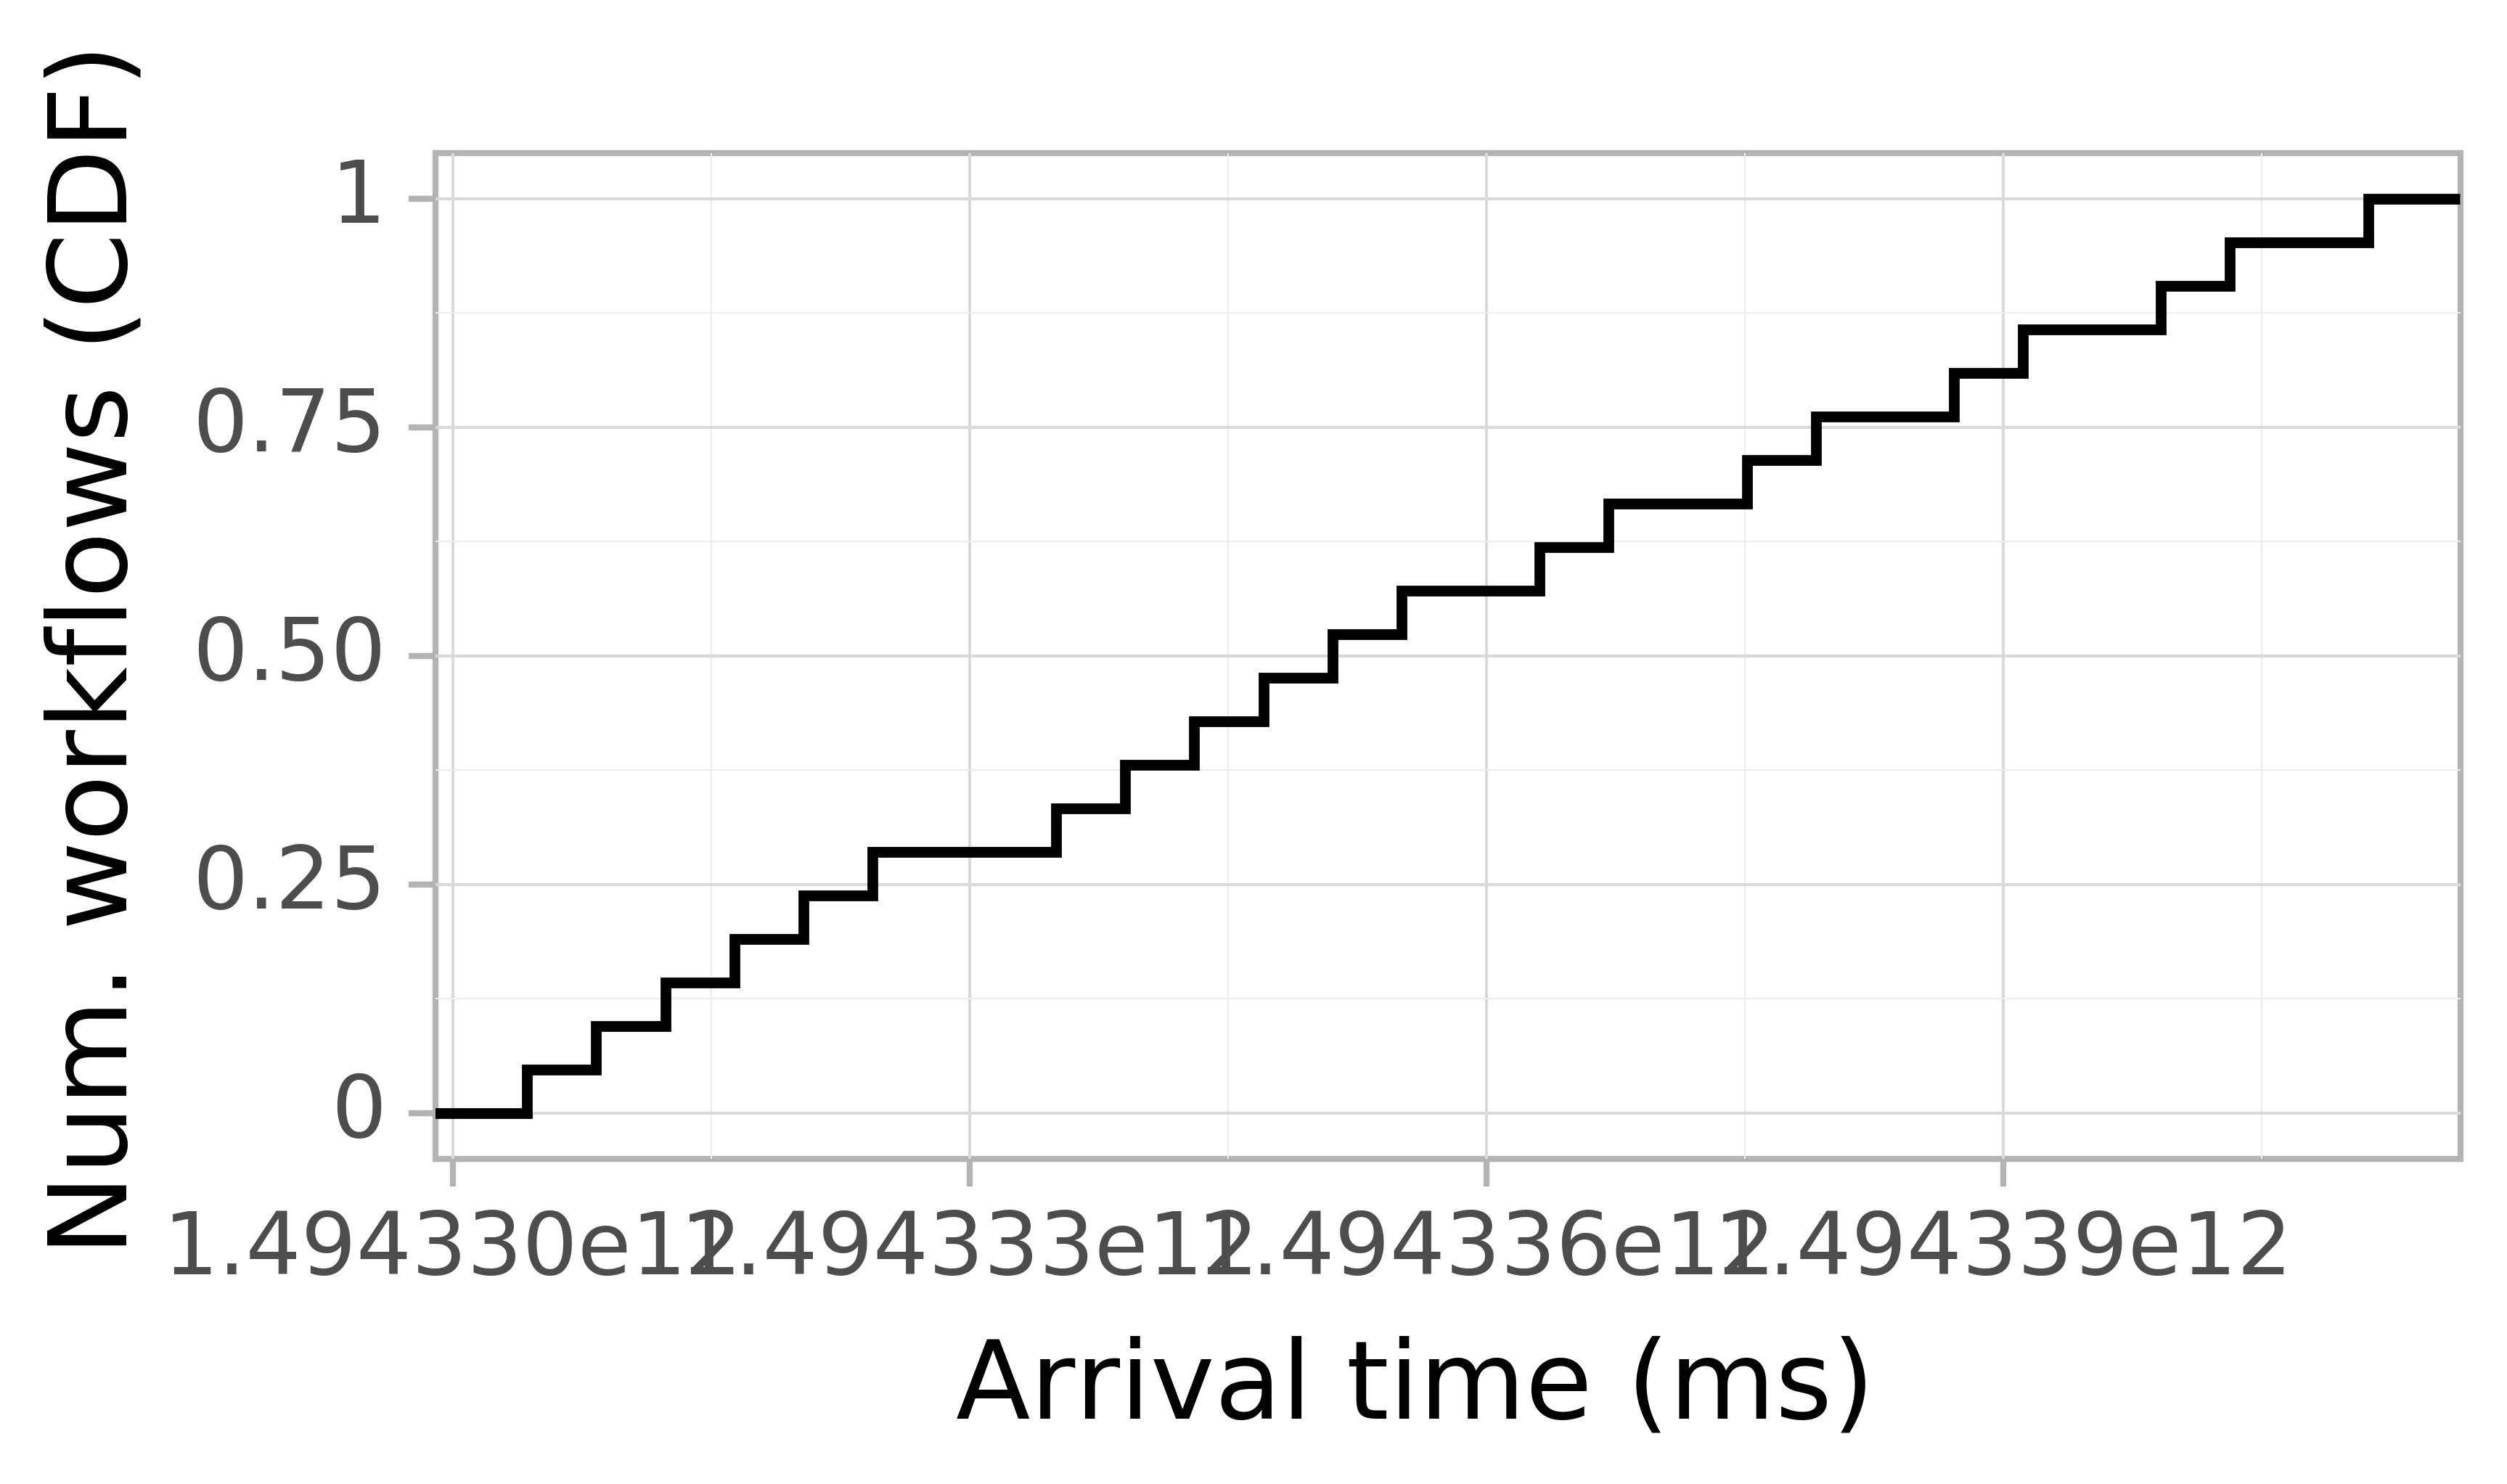 Job arrival CDF graph for the askalon-new_ee51 trace.